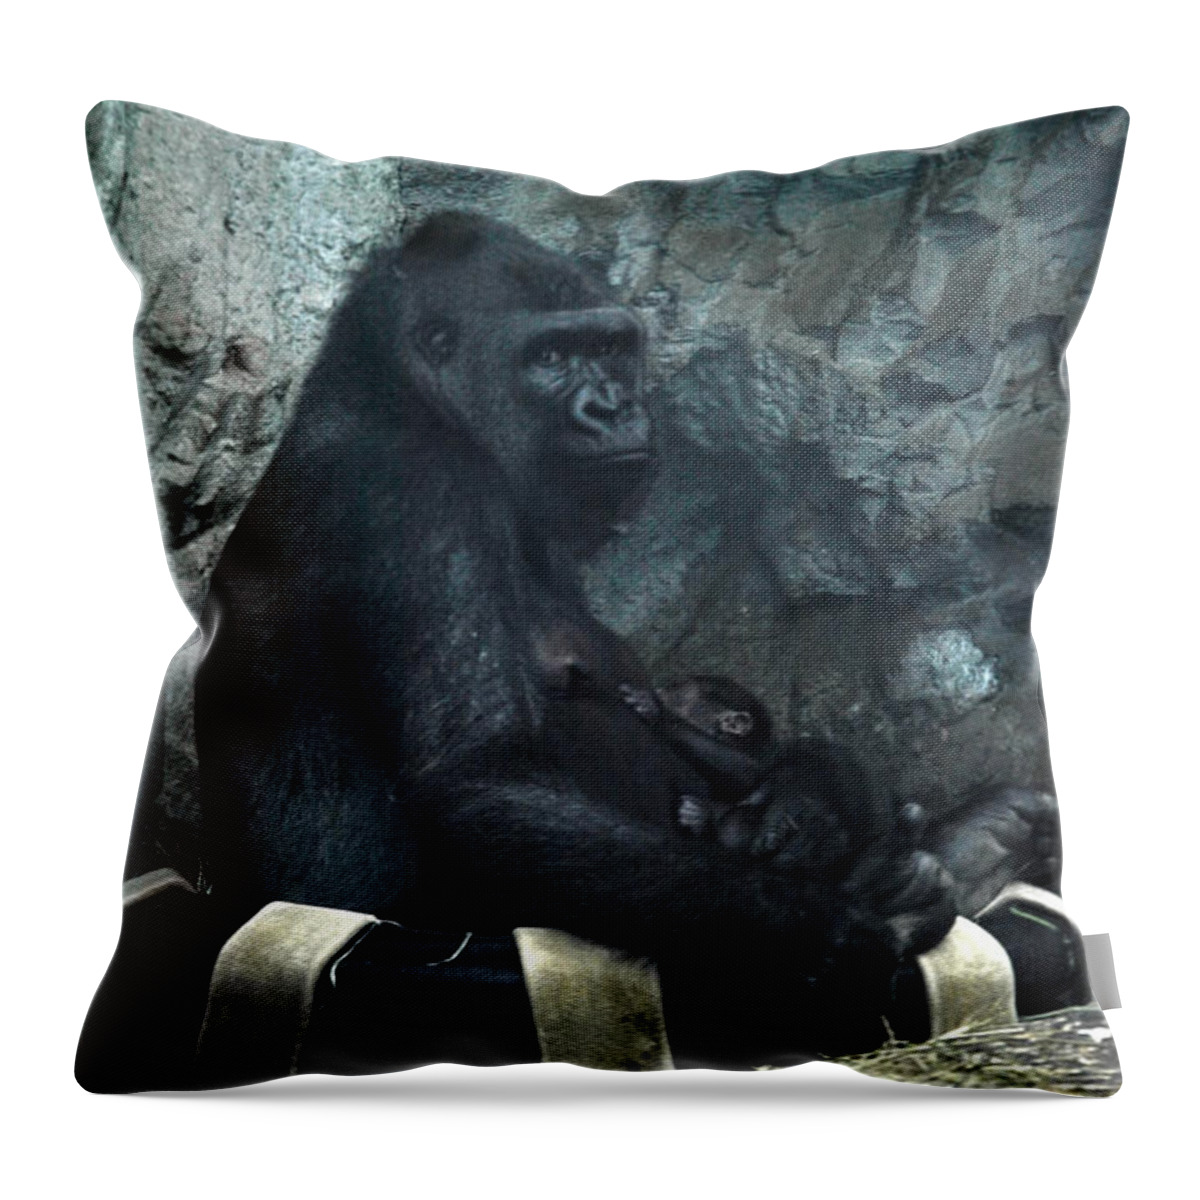 Lion Throw Pillow featuring the photograph Nurturing at The Buffalo Zoo by Michael Frank Jr